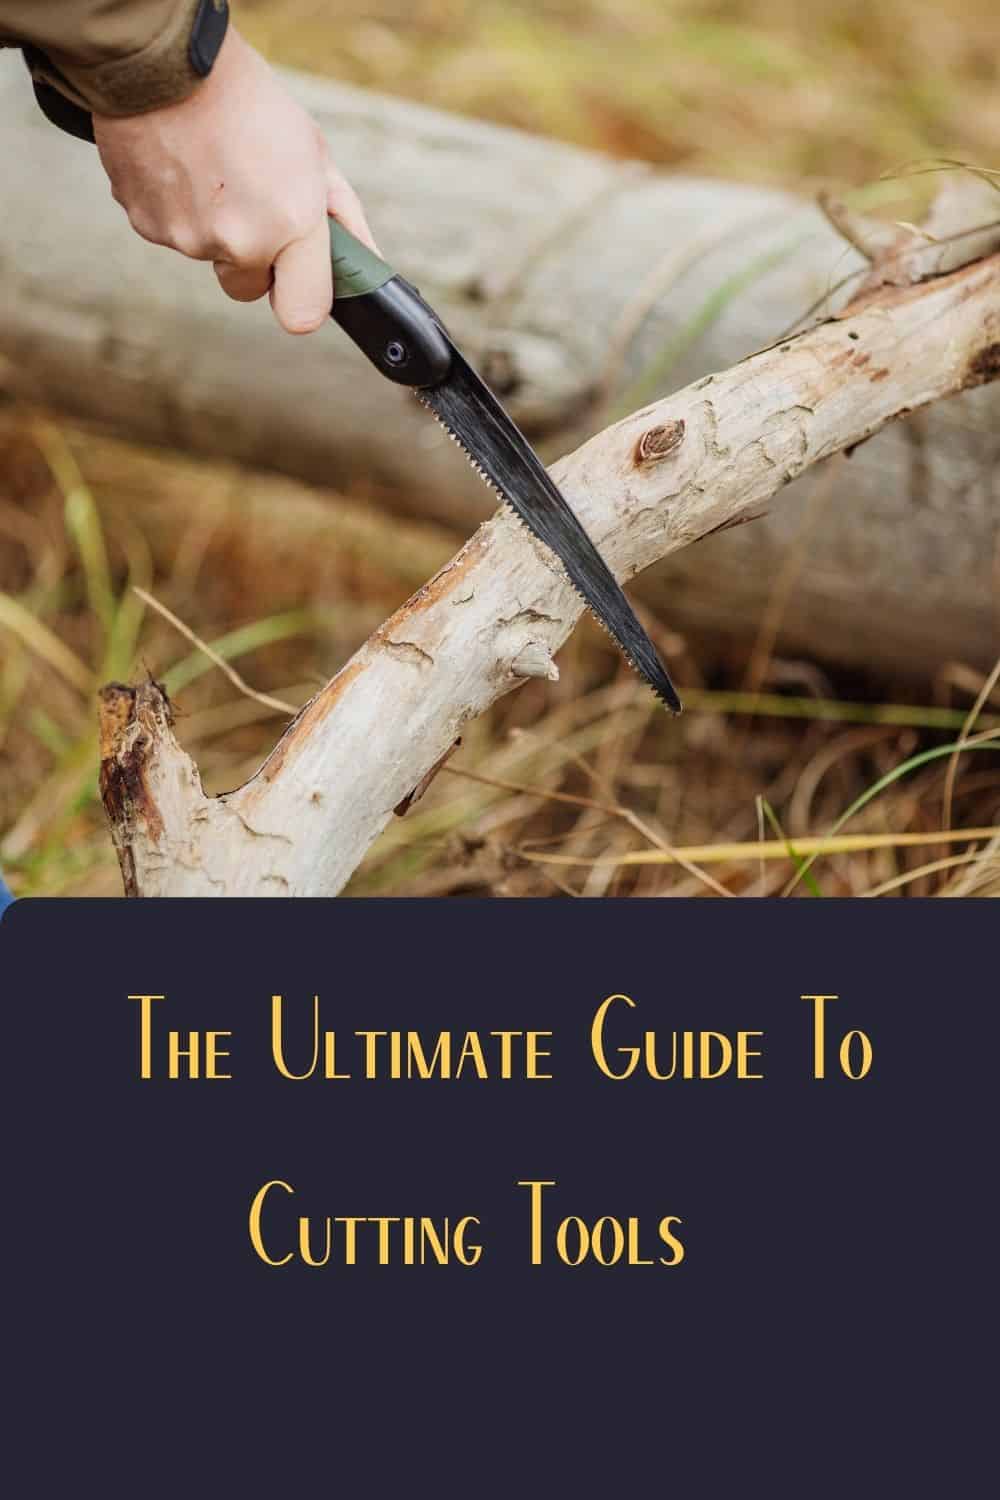 Pinterest image for The Ultimate Guide To Cutting Tools For Camping, Bushcraft, And Survival